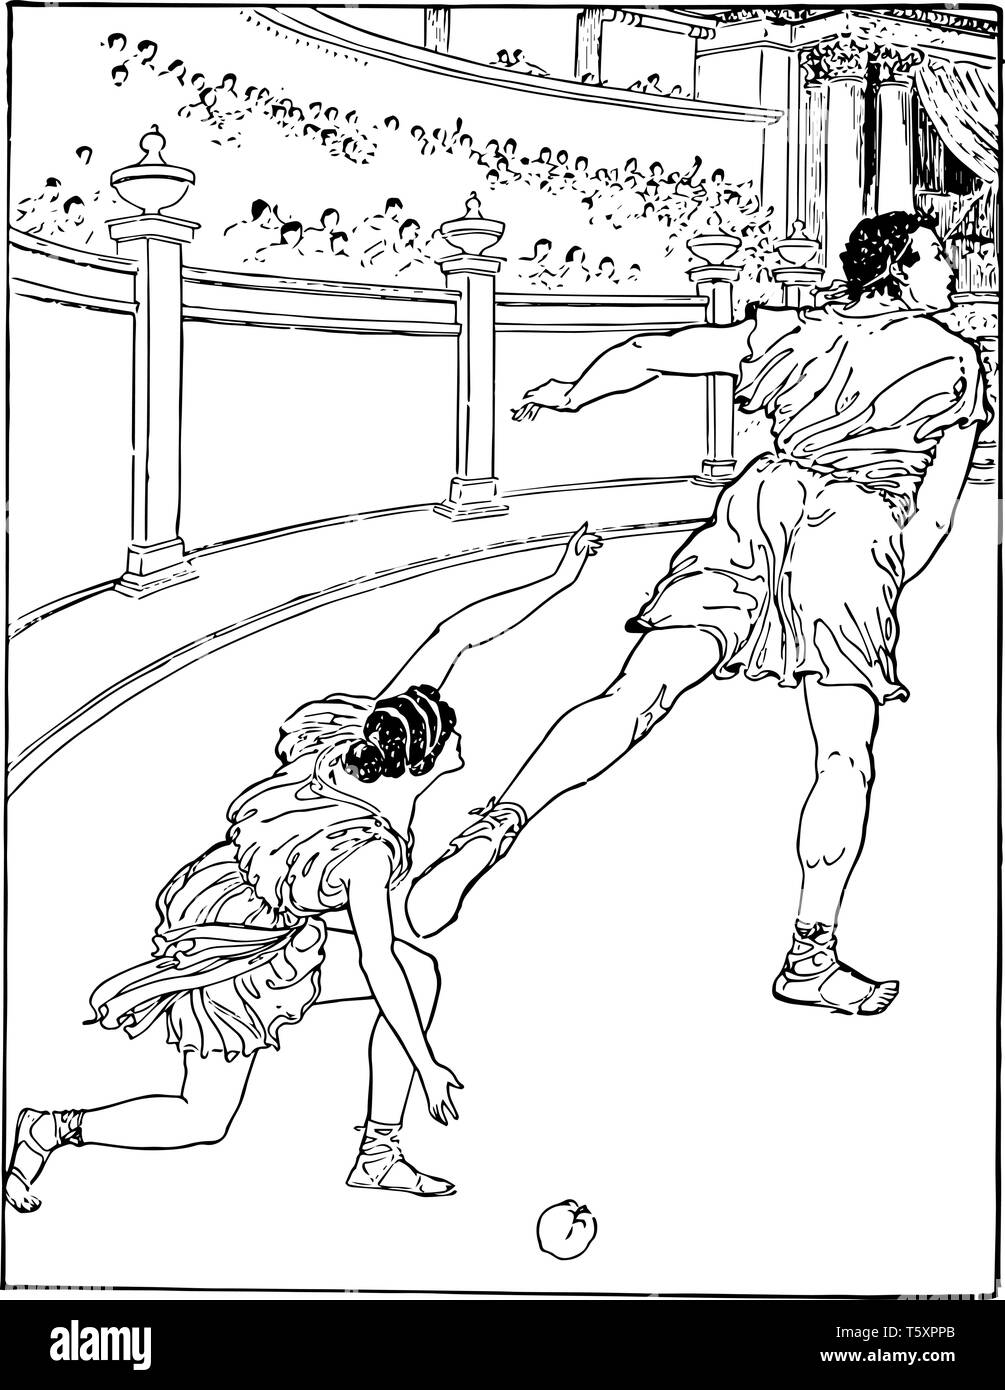 One Of The Famous Races In Greek Mythology Where Atalanta Was Lured To Grab A Golden